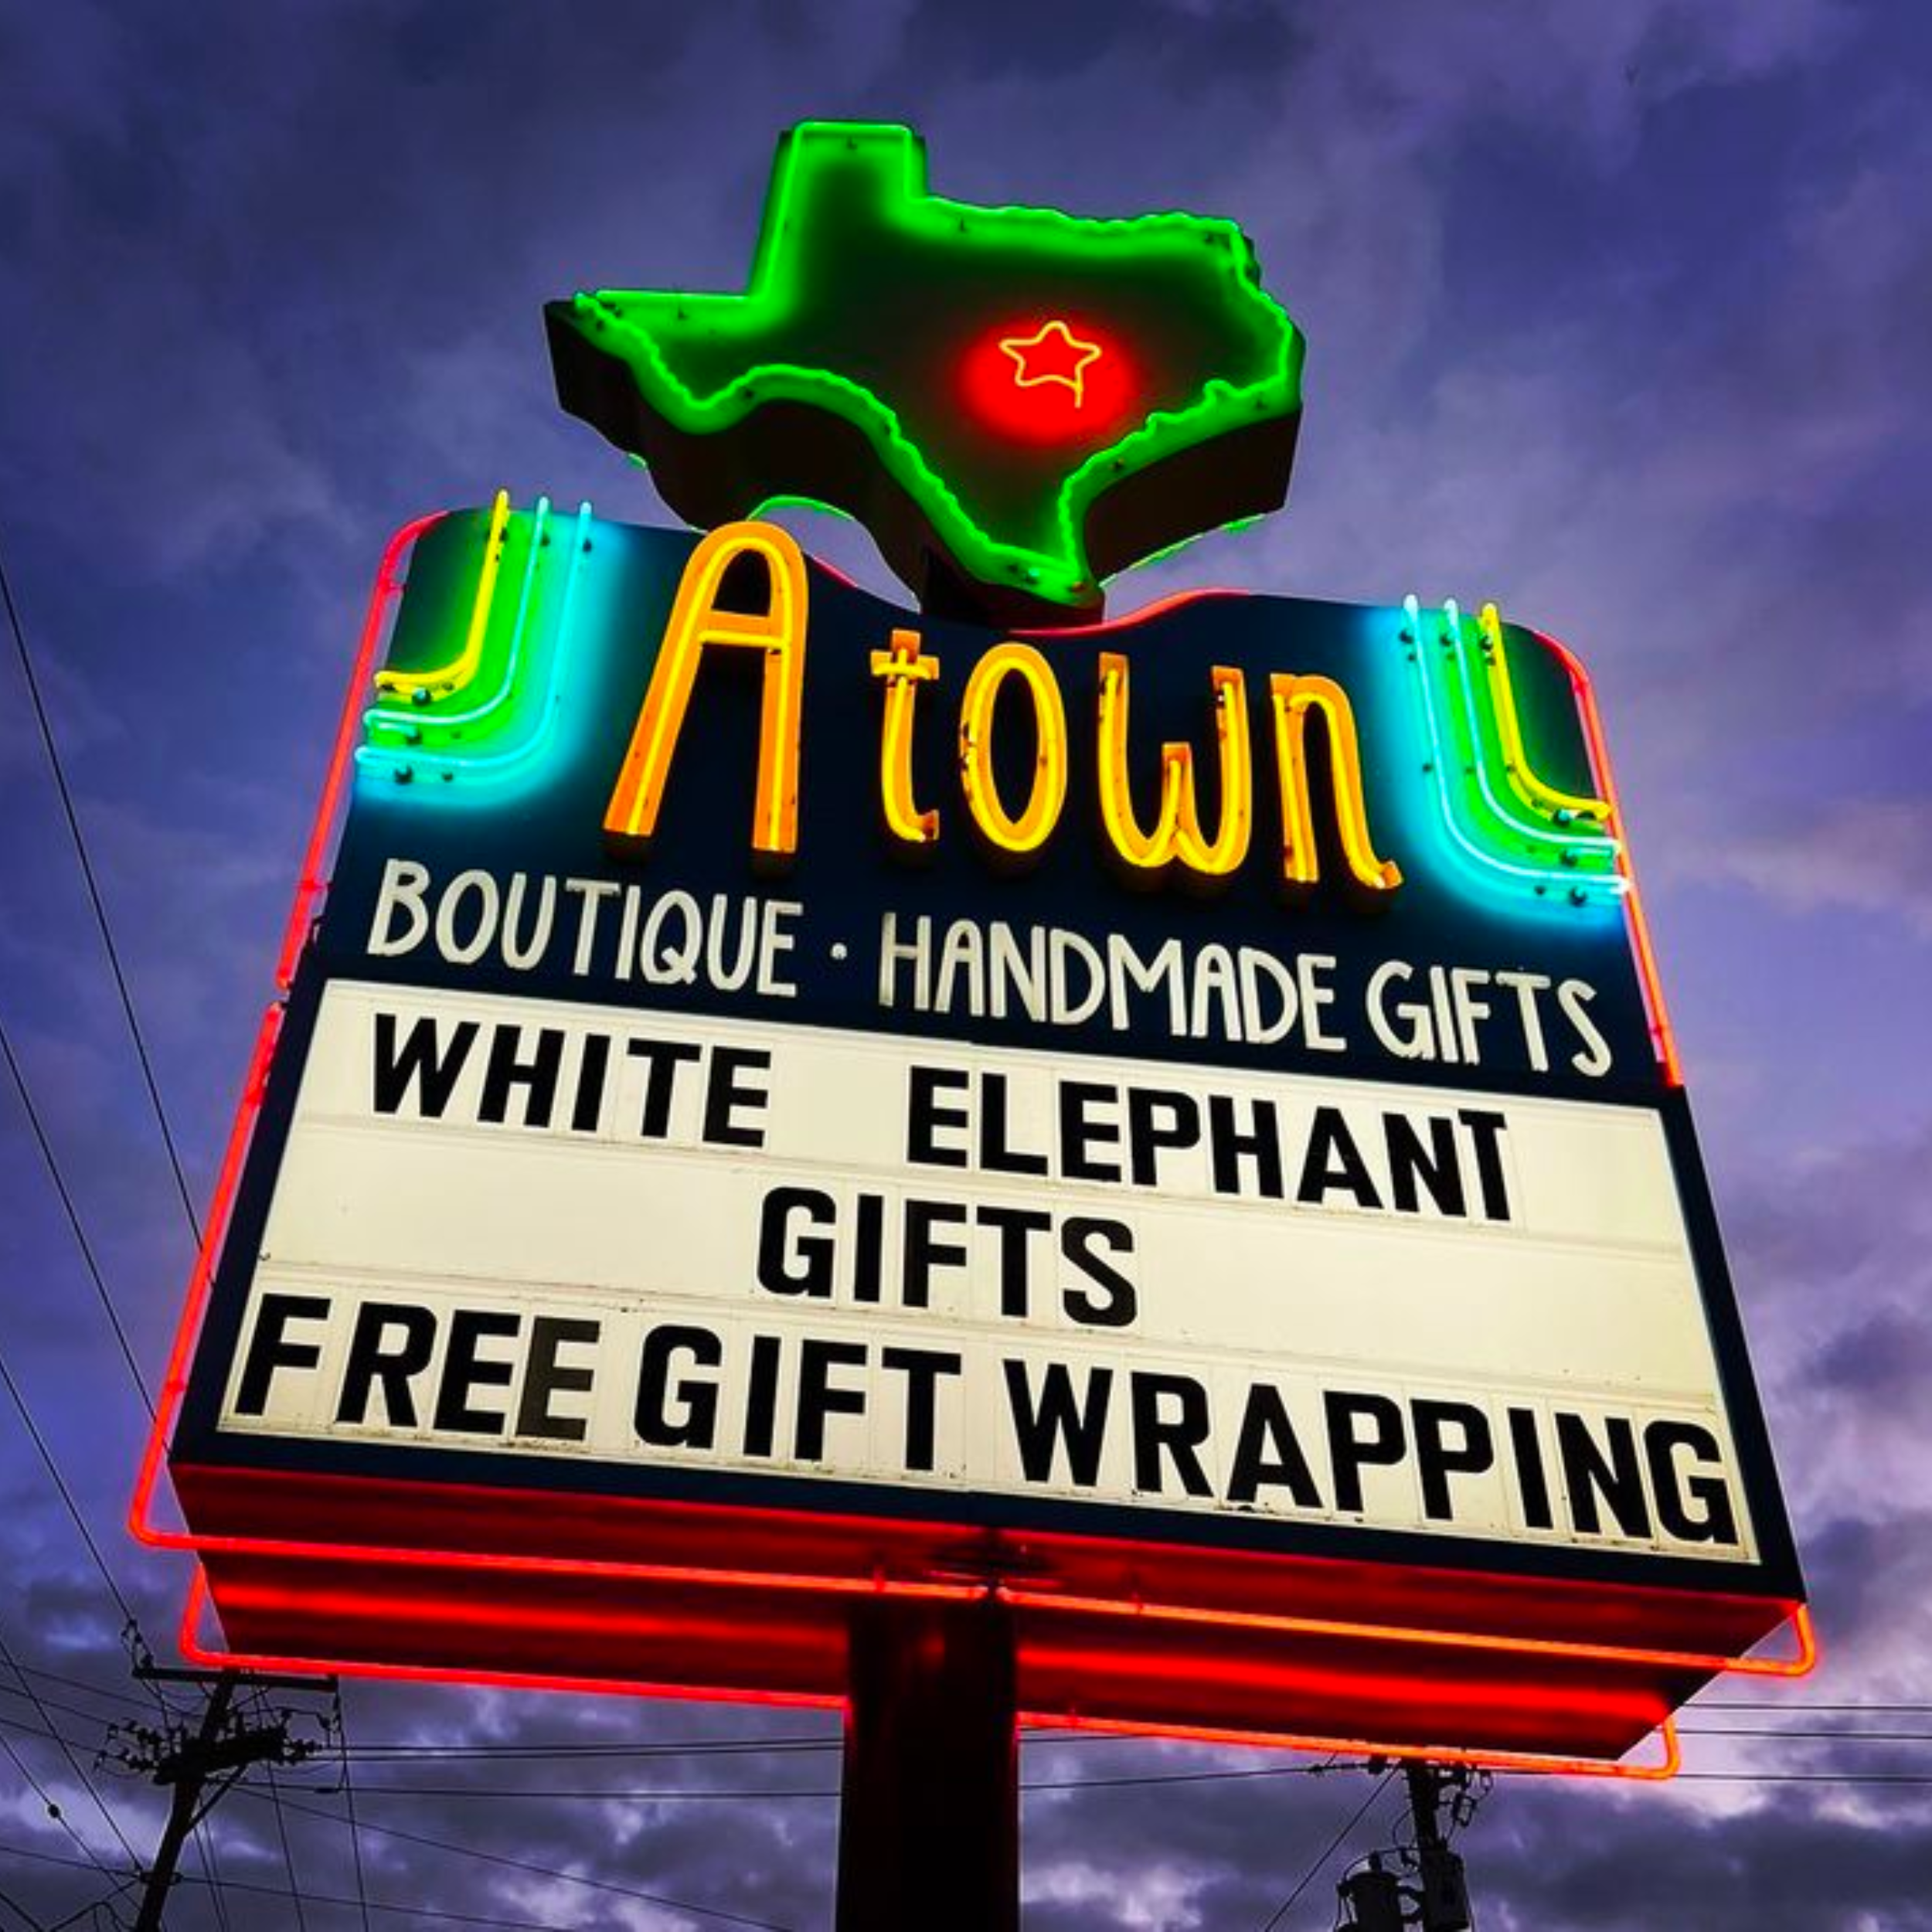 ATown Gift Shop neon sign at night in Austin, Texas